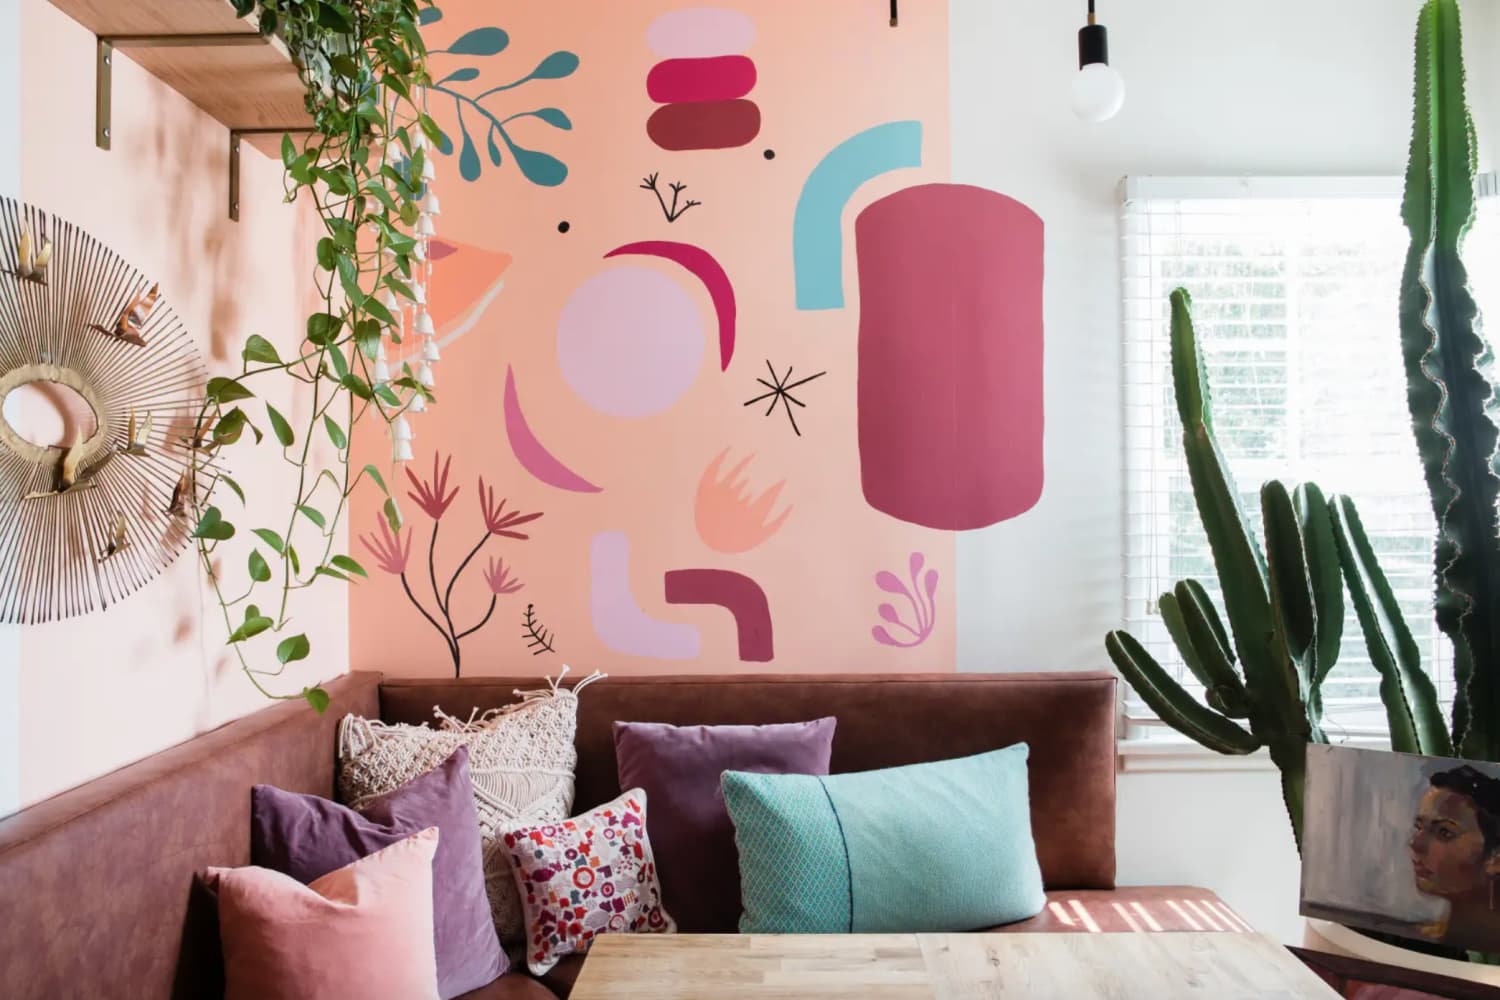 Interior Trend: soft pink walls - cate st hill